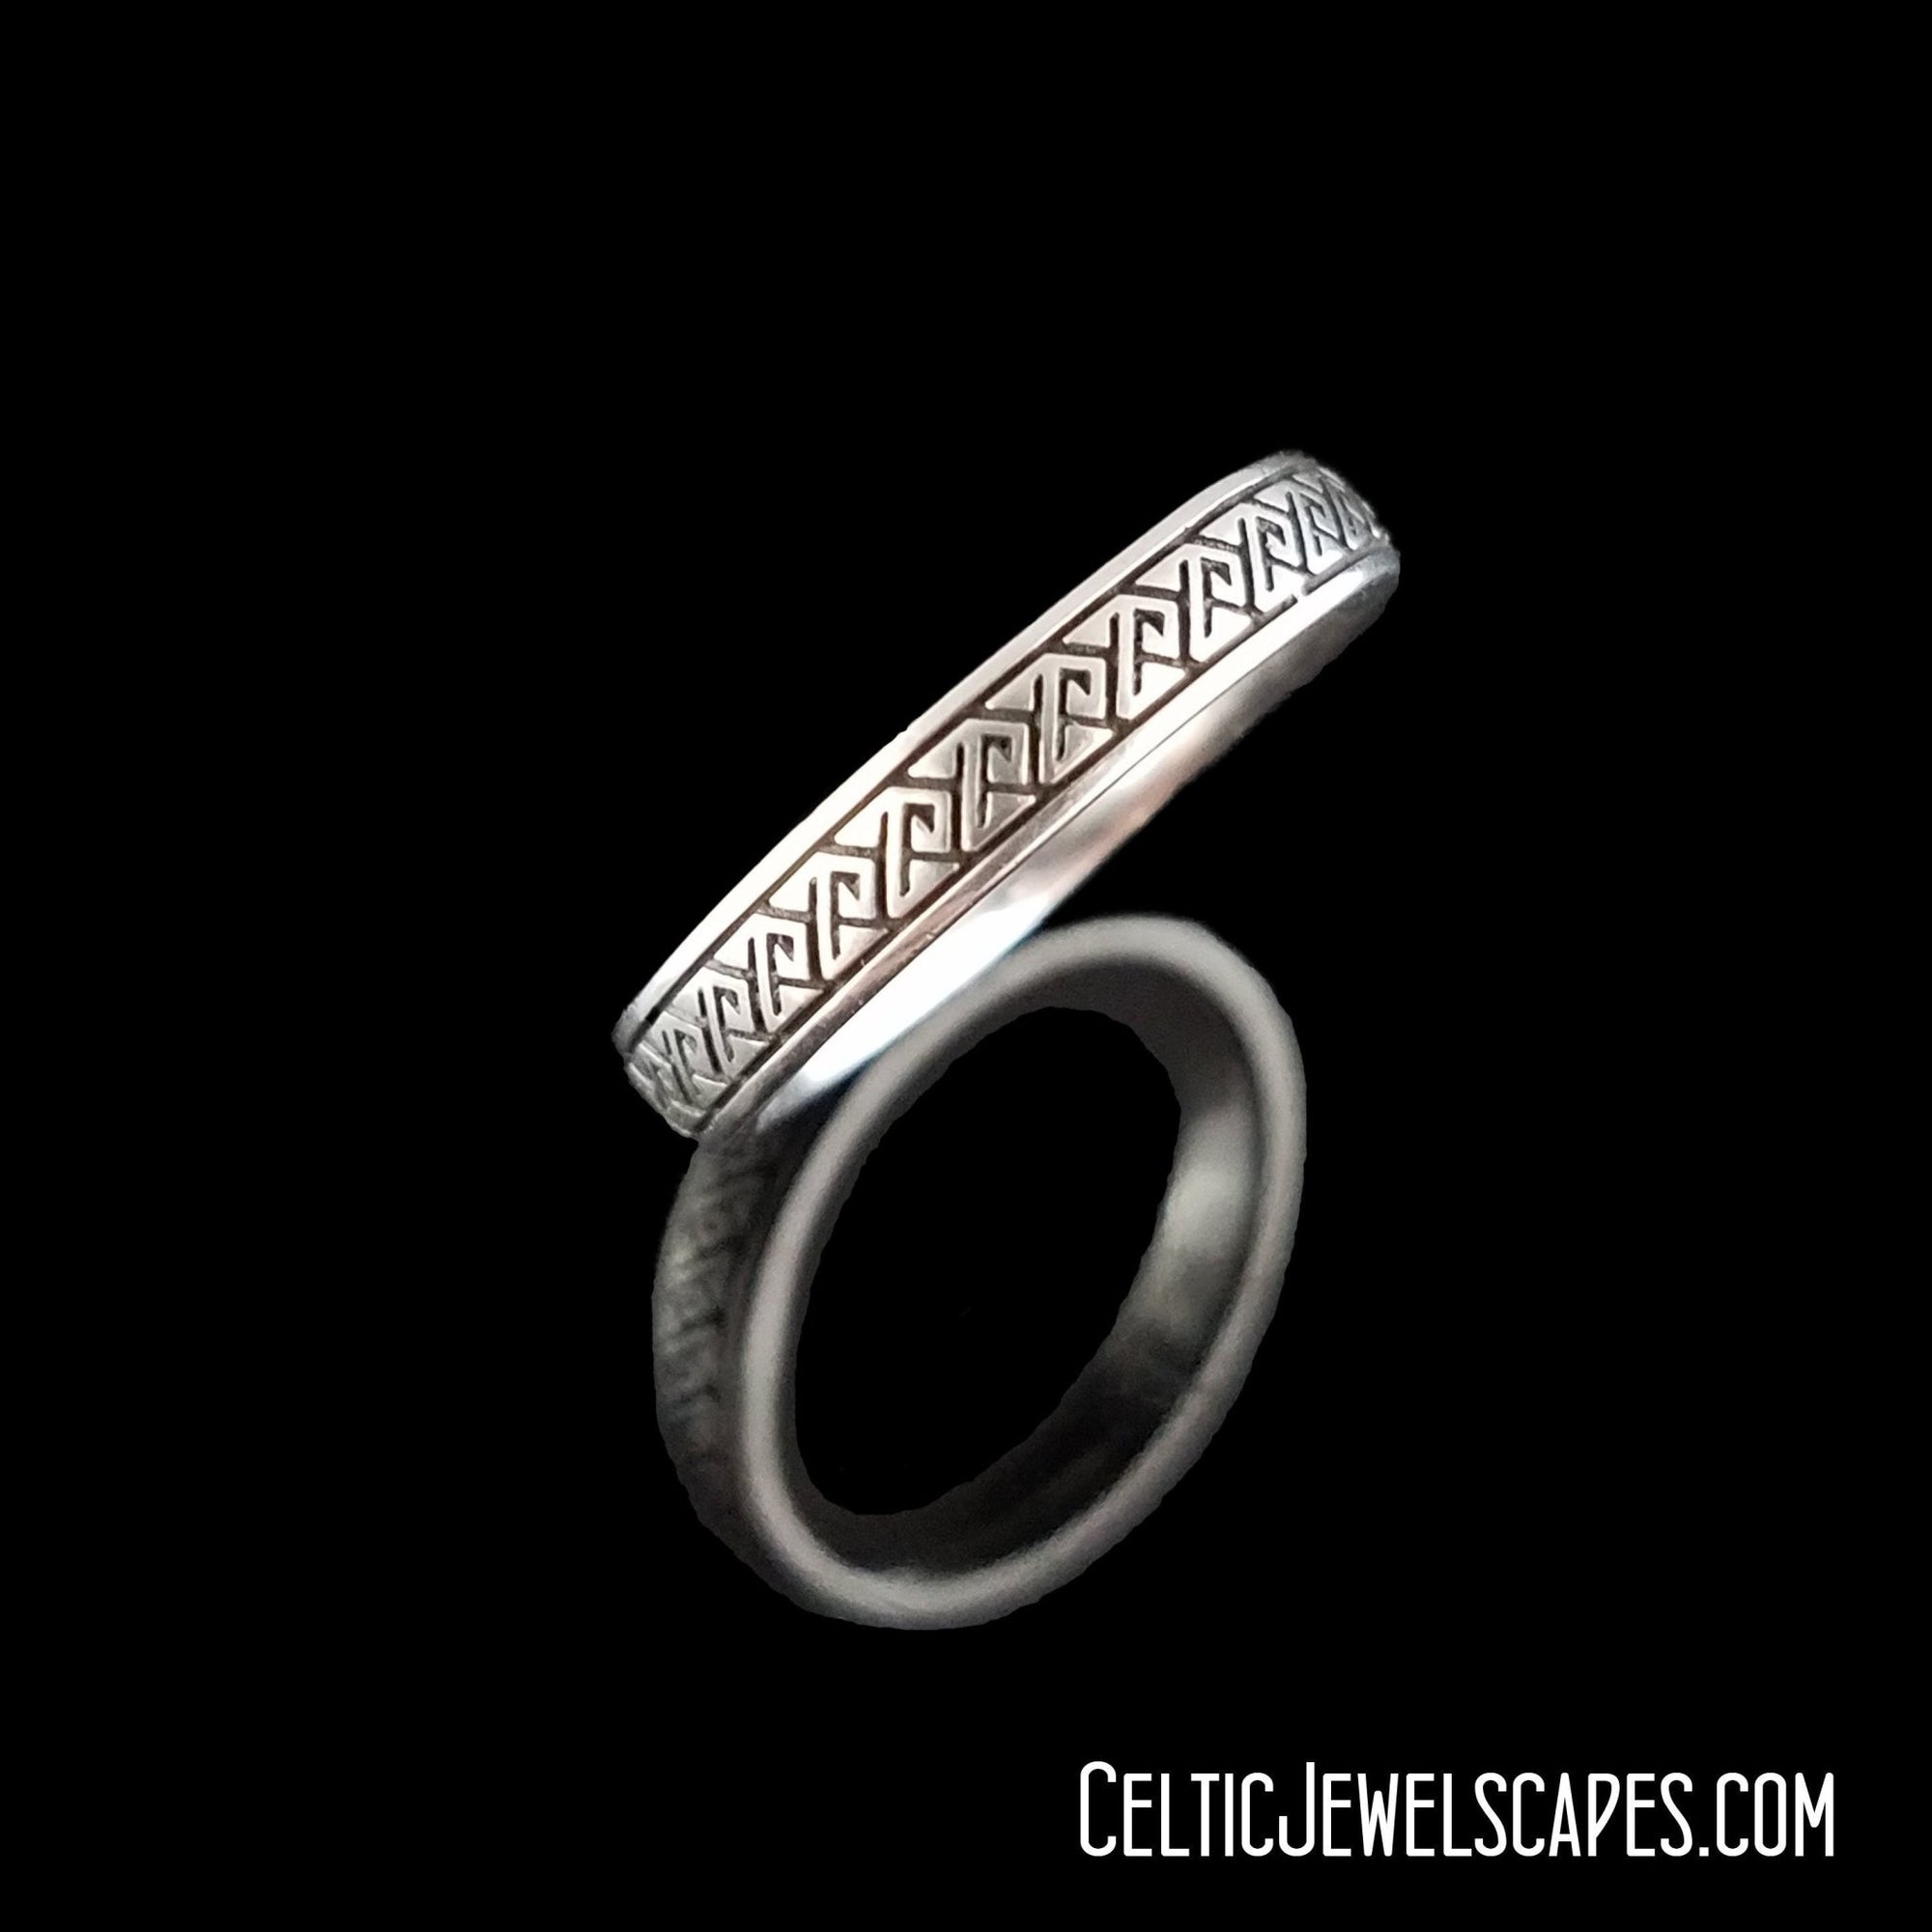 DURROW Narrow Starting at $139 - Celtic Jewelscapes